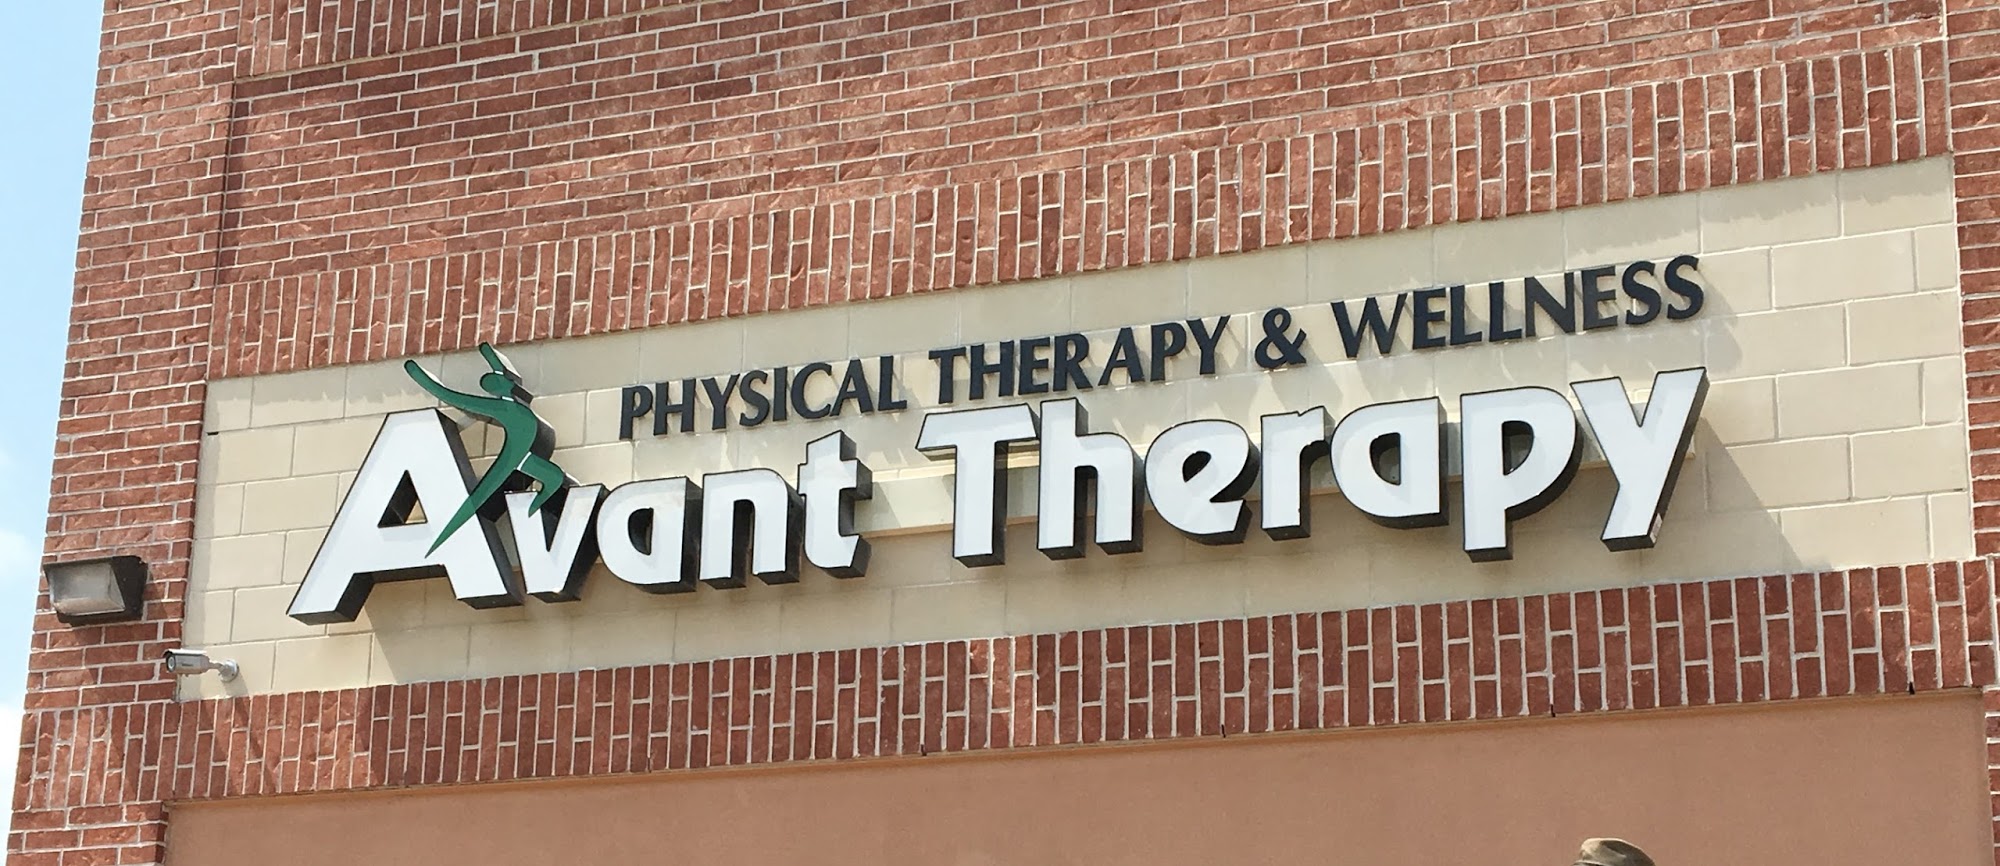 Avant Therapy. Physical Therapy and Wellness